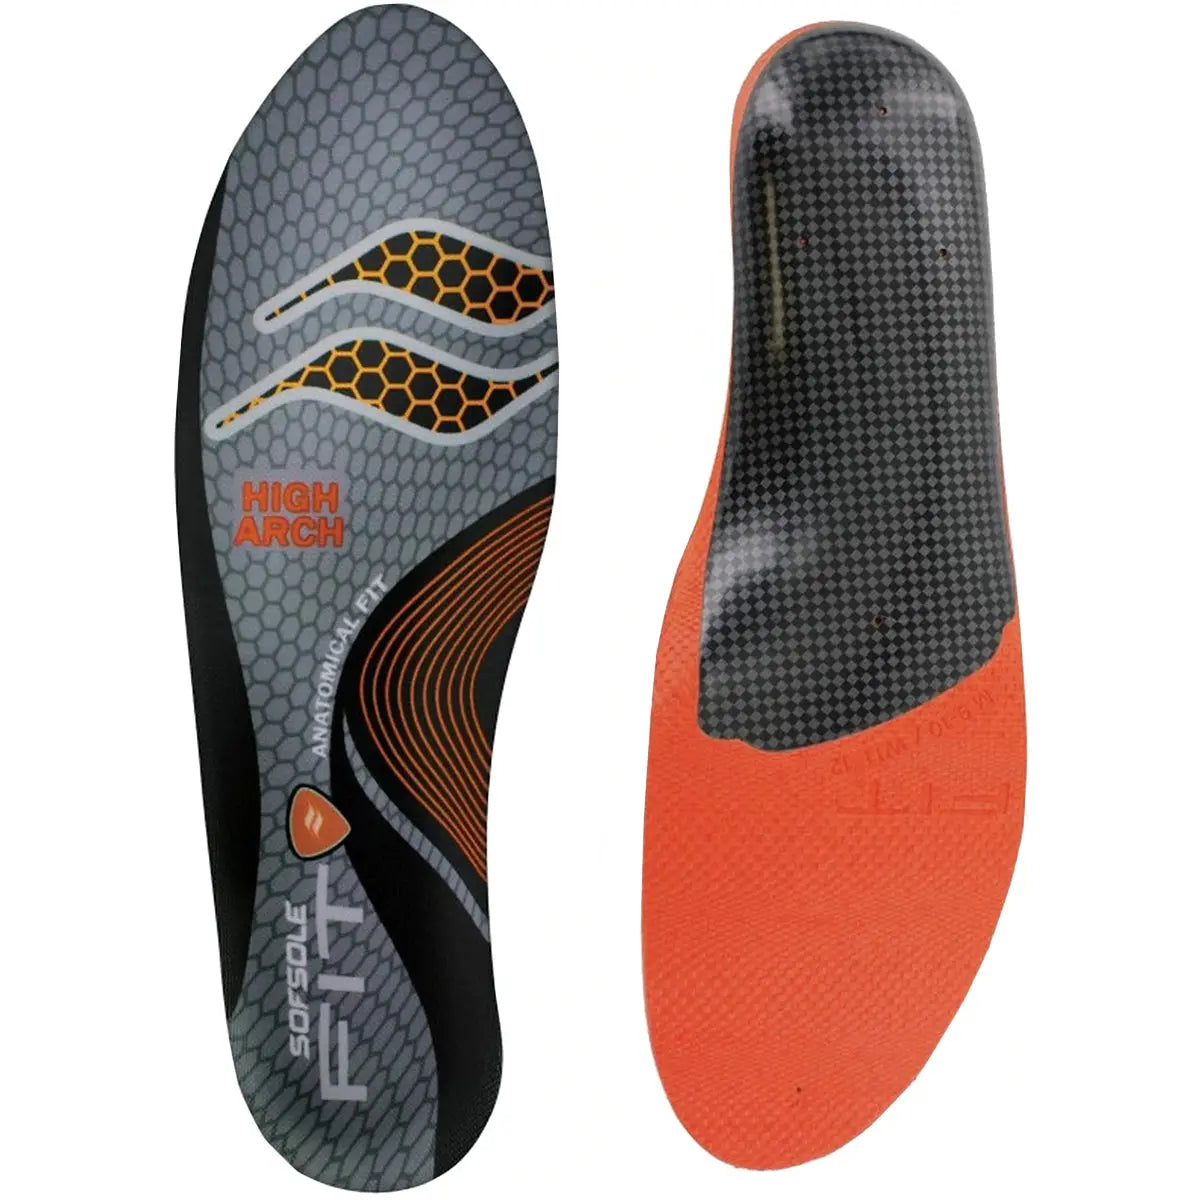 Sof Sole Fit Series High Arch Shoe Insoles SofSole